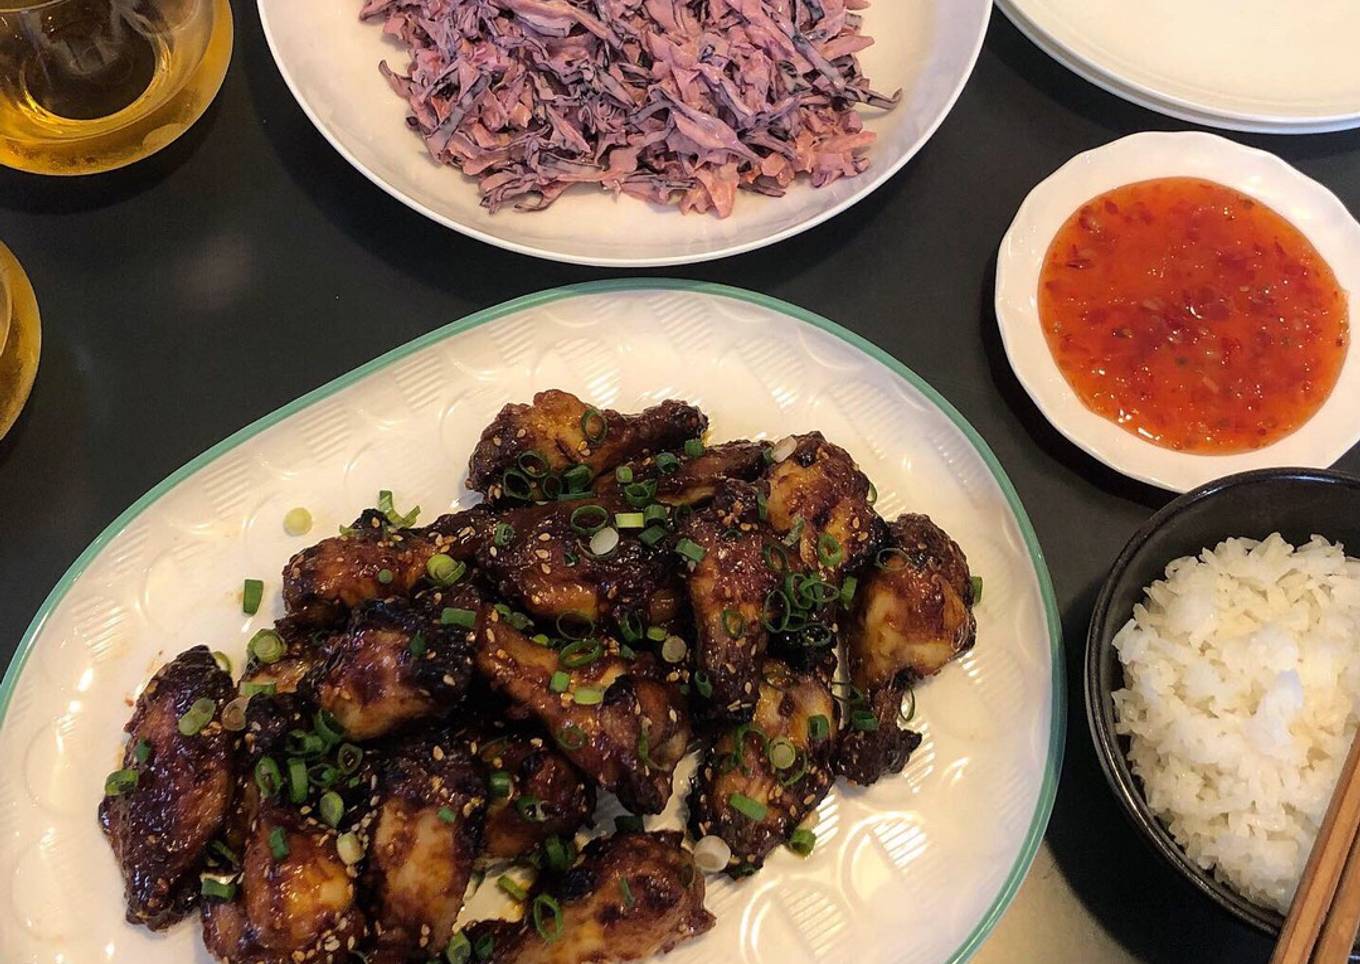 Sweet & sticky wings with classic slaw